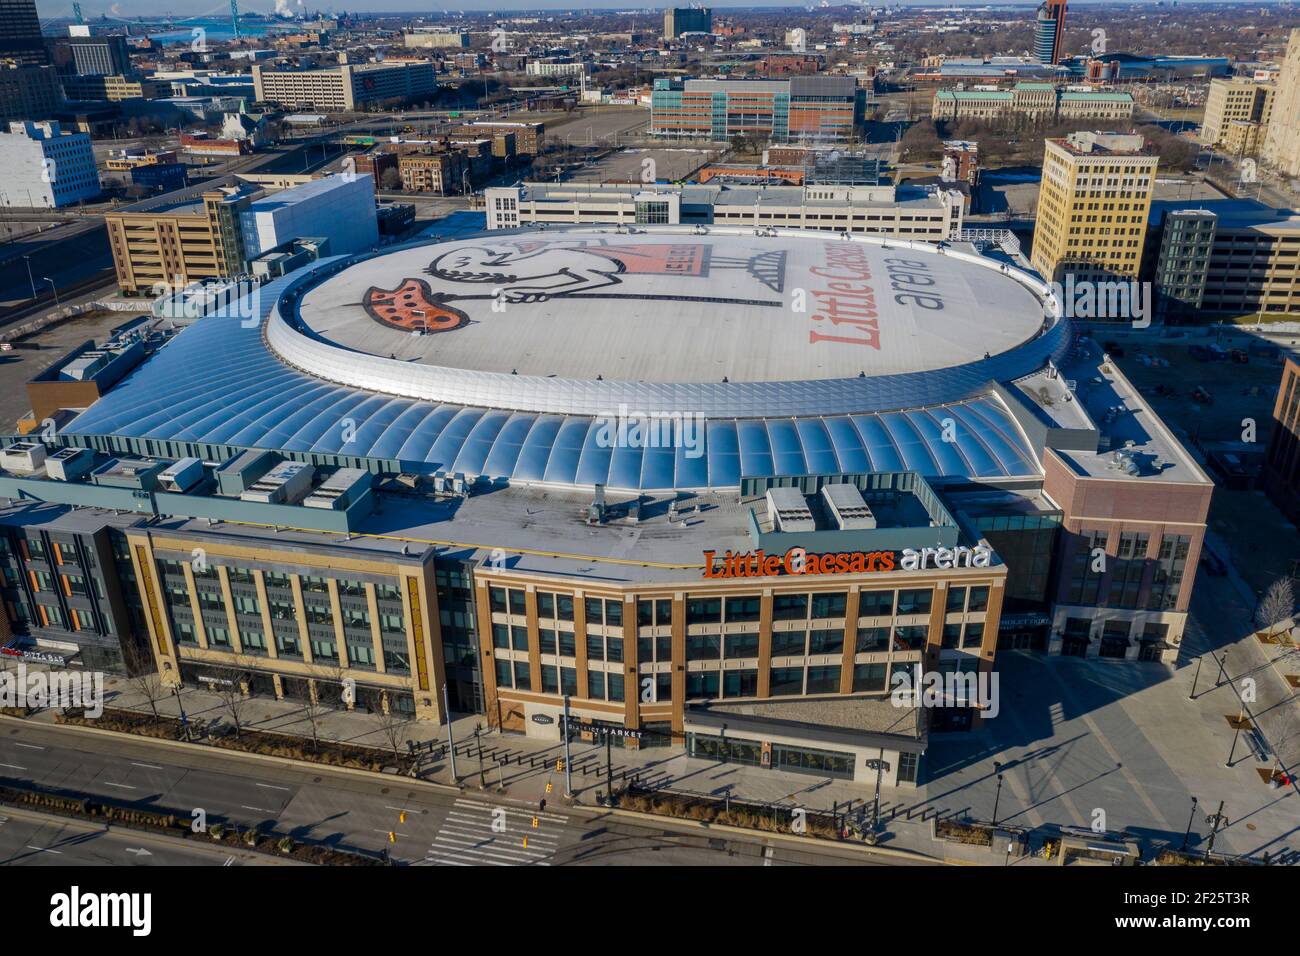 Little Caesars Arena, section M29, home of Detroit Pistons, Detroit Red  Wings, page 1